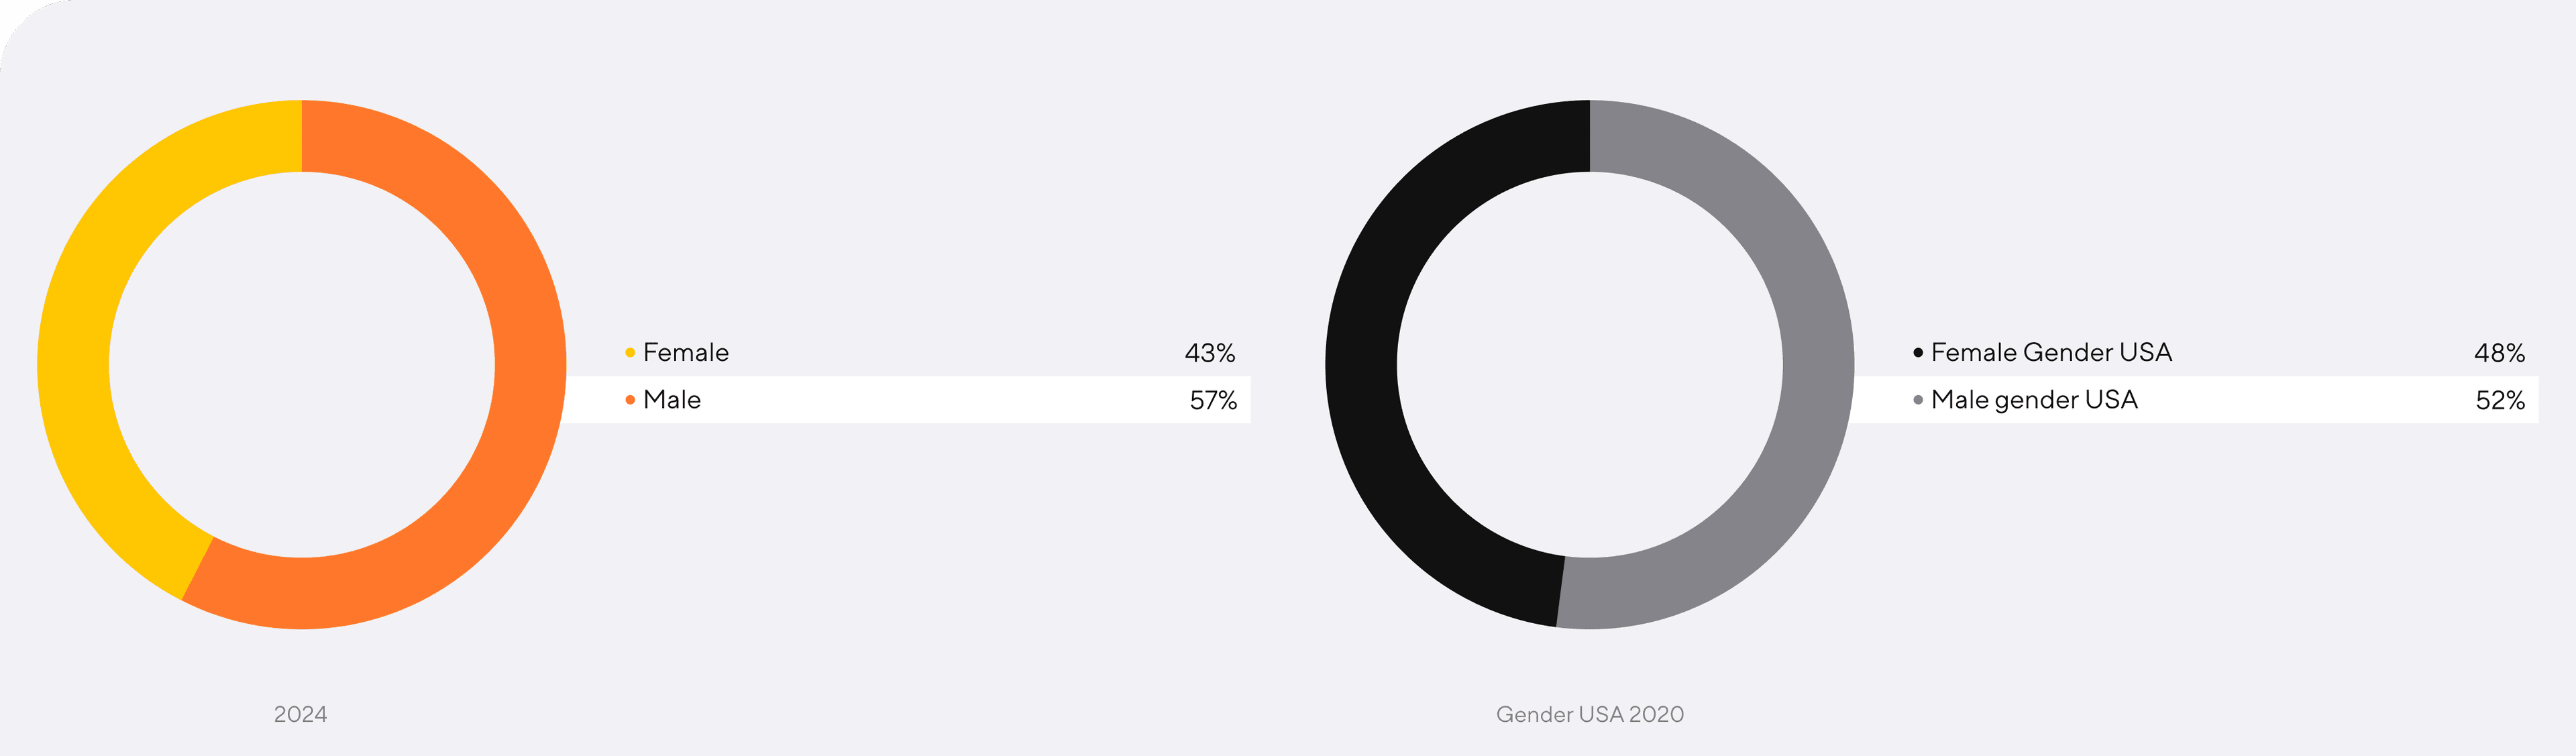 Two donut charts. The first is titled 2024 and displays Female at 43% and Male at 57%. The second is titled Gender USA 2020 and displays Female at 48% and Male at 52%.